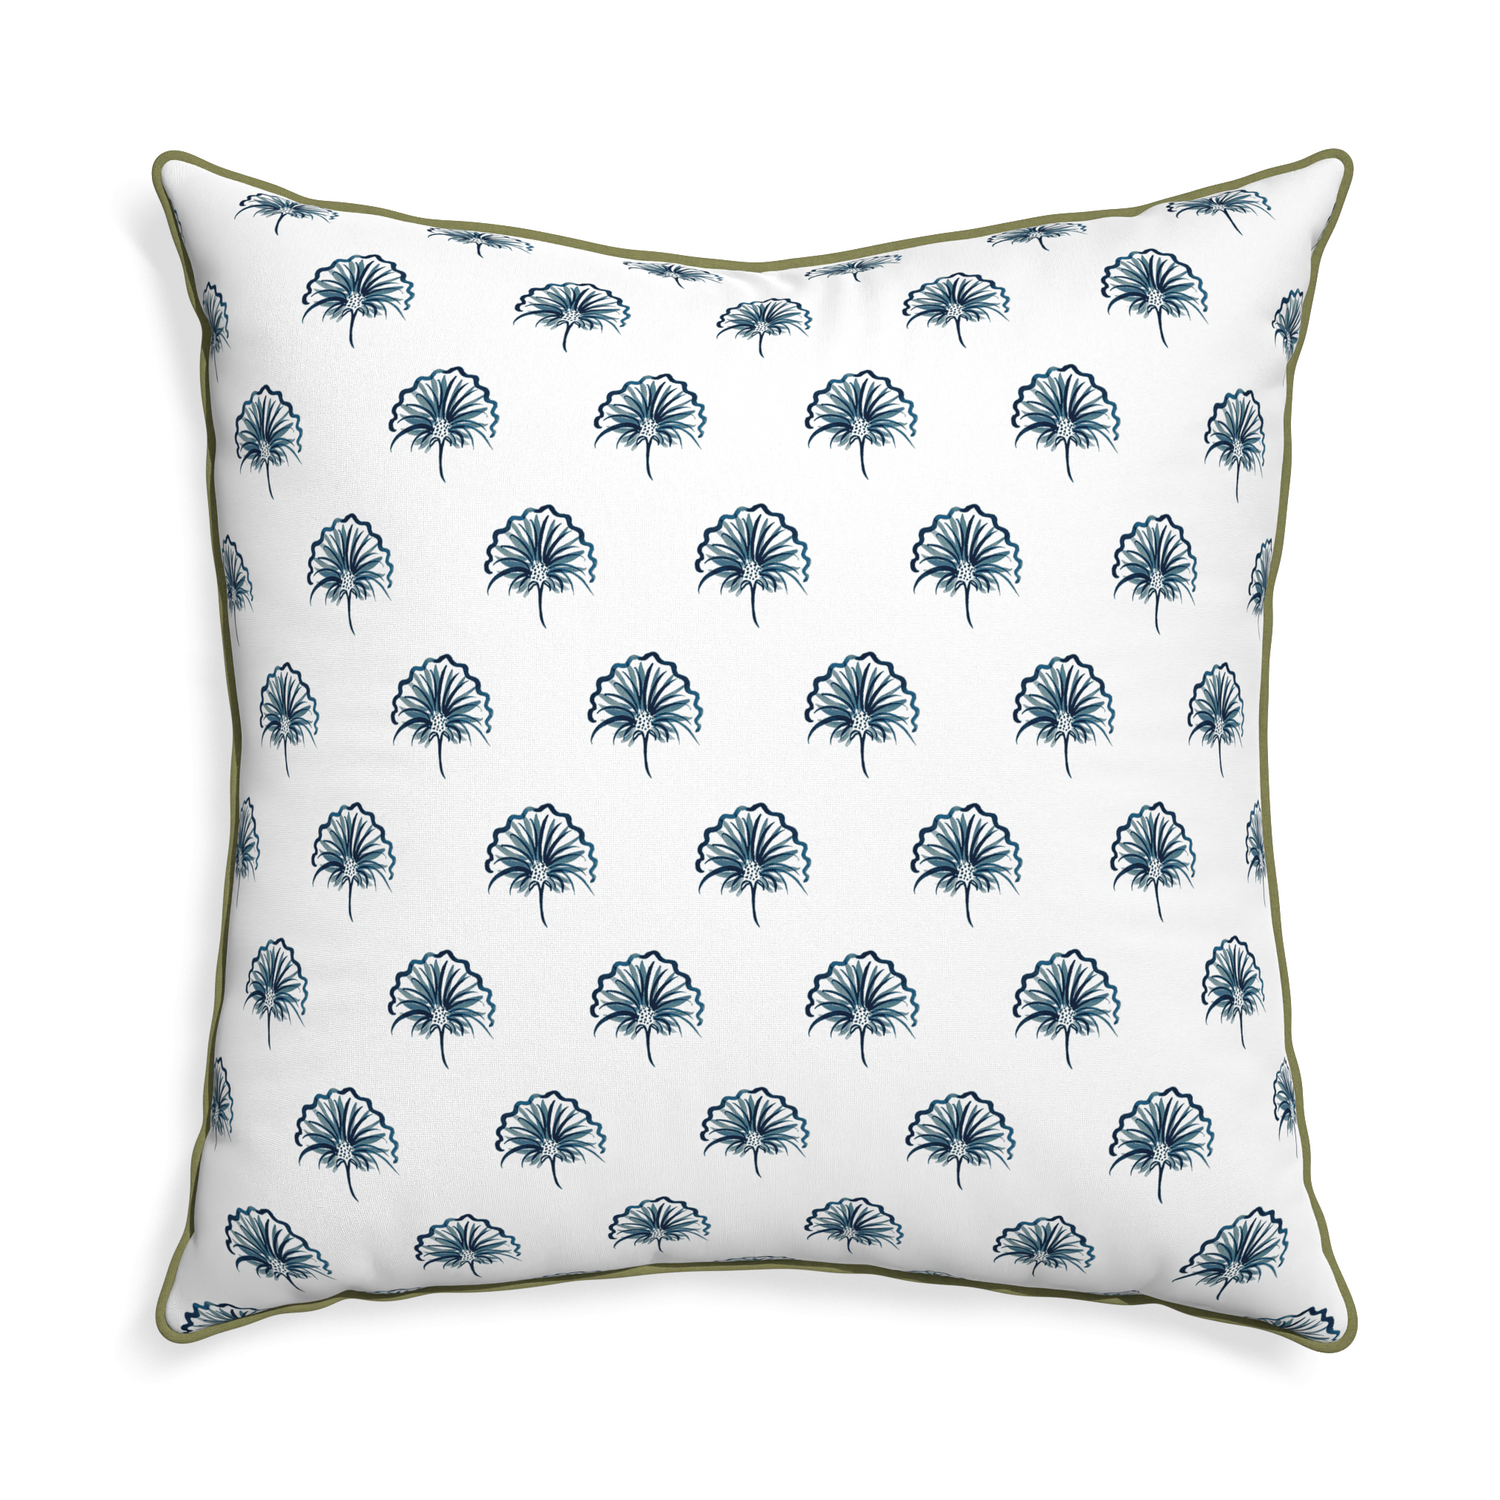 Euro-sham penelope midnight custom floral navypillow with moss piping on white background